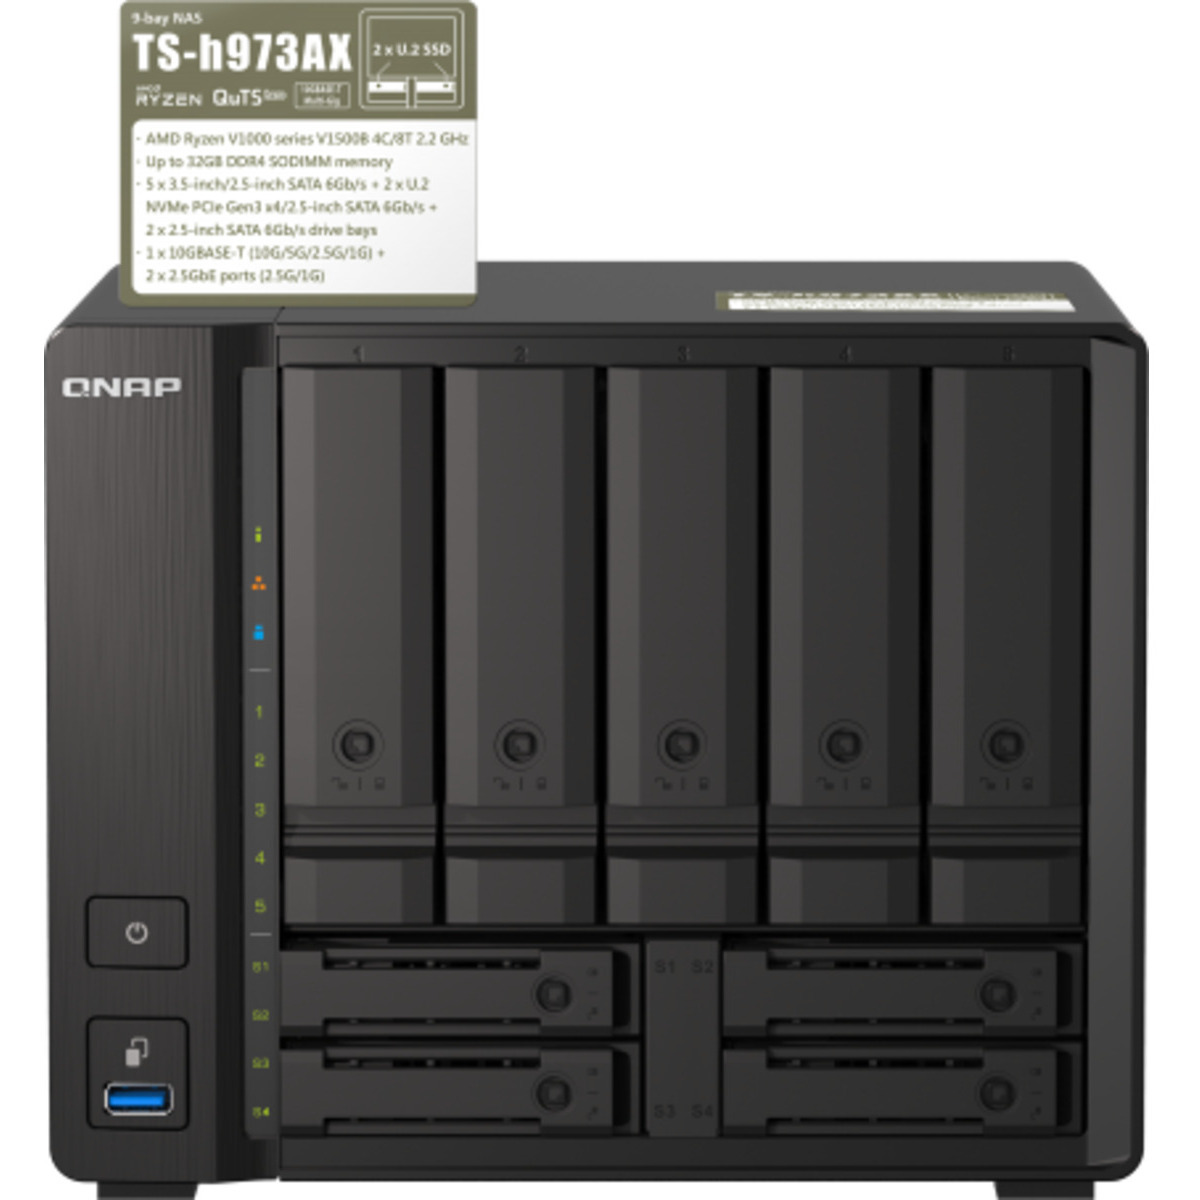 QNAP TS-h973AX  30tb 5+4-Bay Desktop Multimedia / Power User / Business NAS - Network Attached Storage Device 5x6tb Western Digital Red Plus WD60EFPX 3.5 5640rpm SATA 6Gb/s HDD NAS Class Drives Installed - Burn-In Tested TS-h973AX 